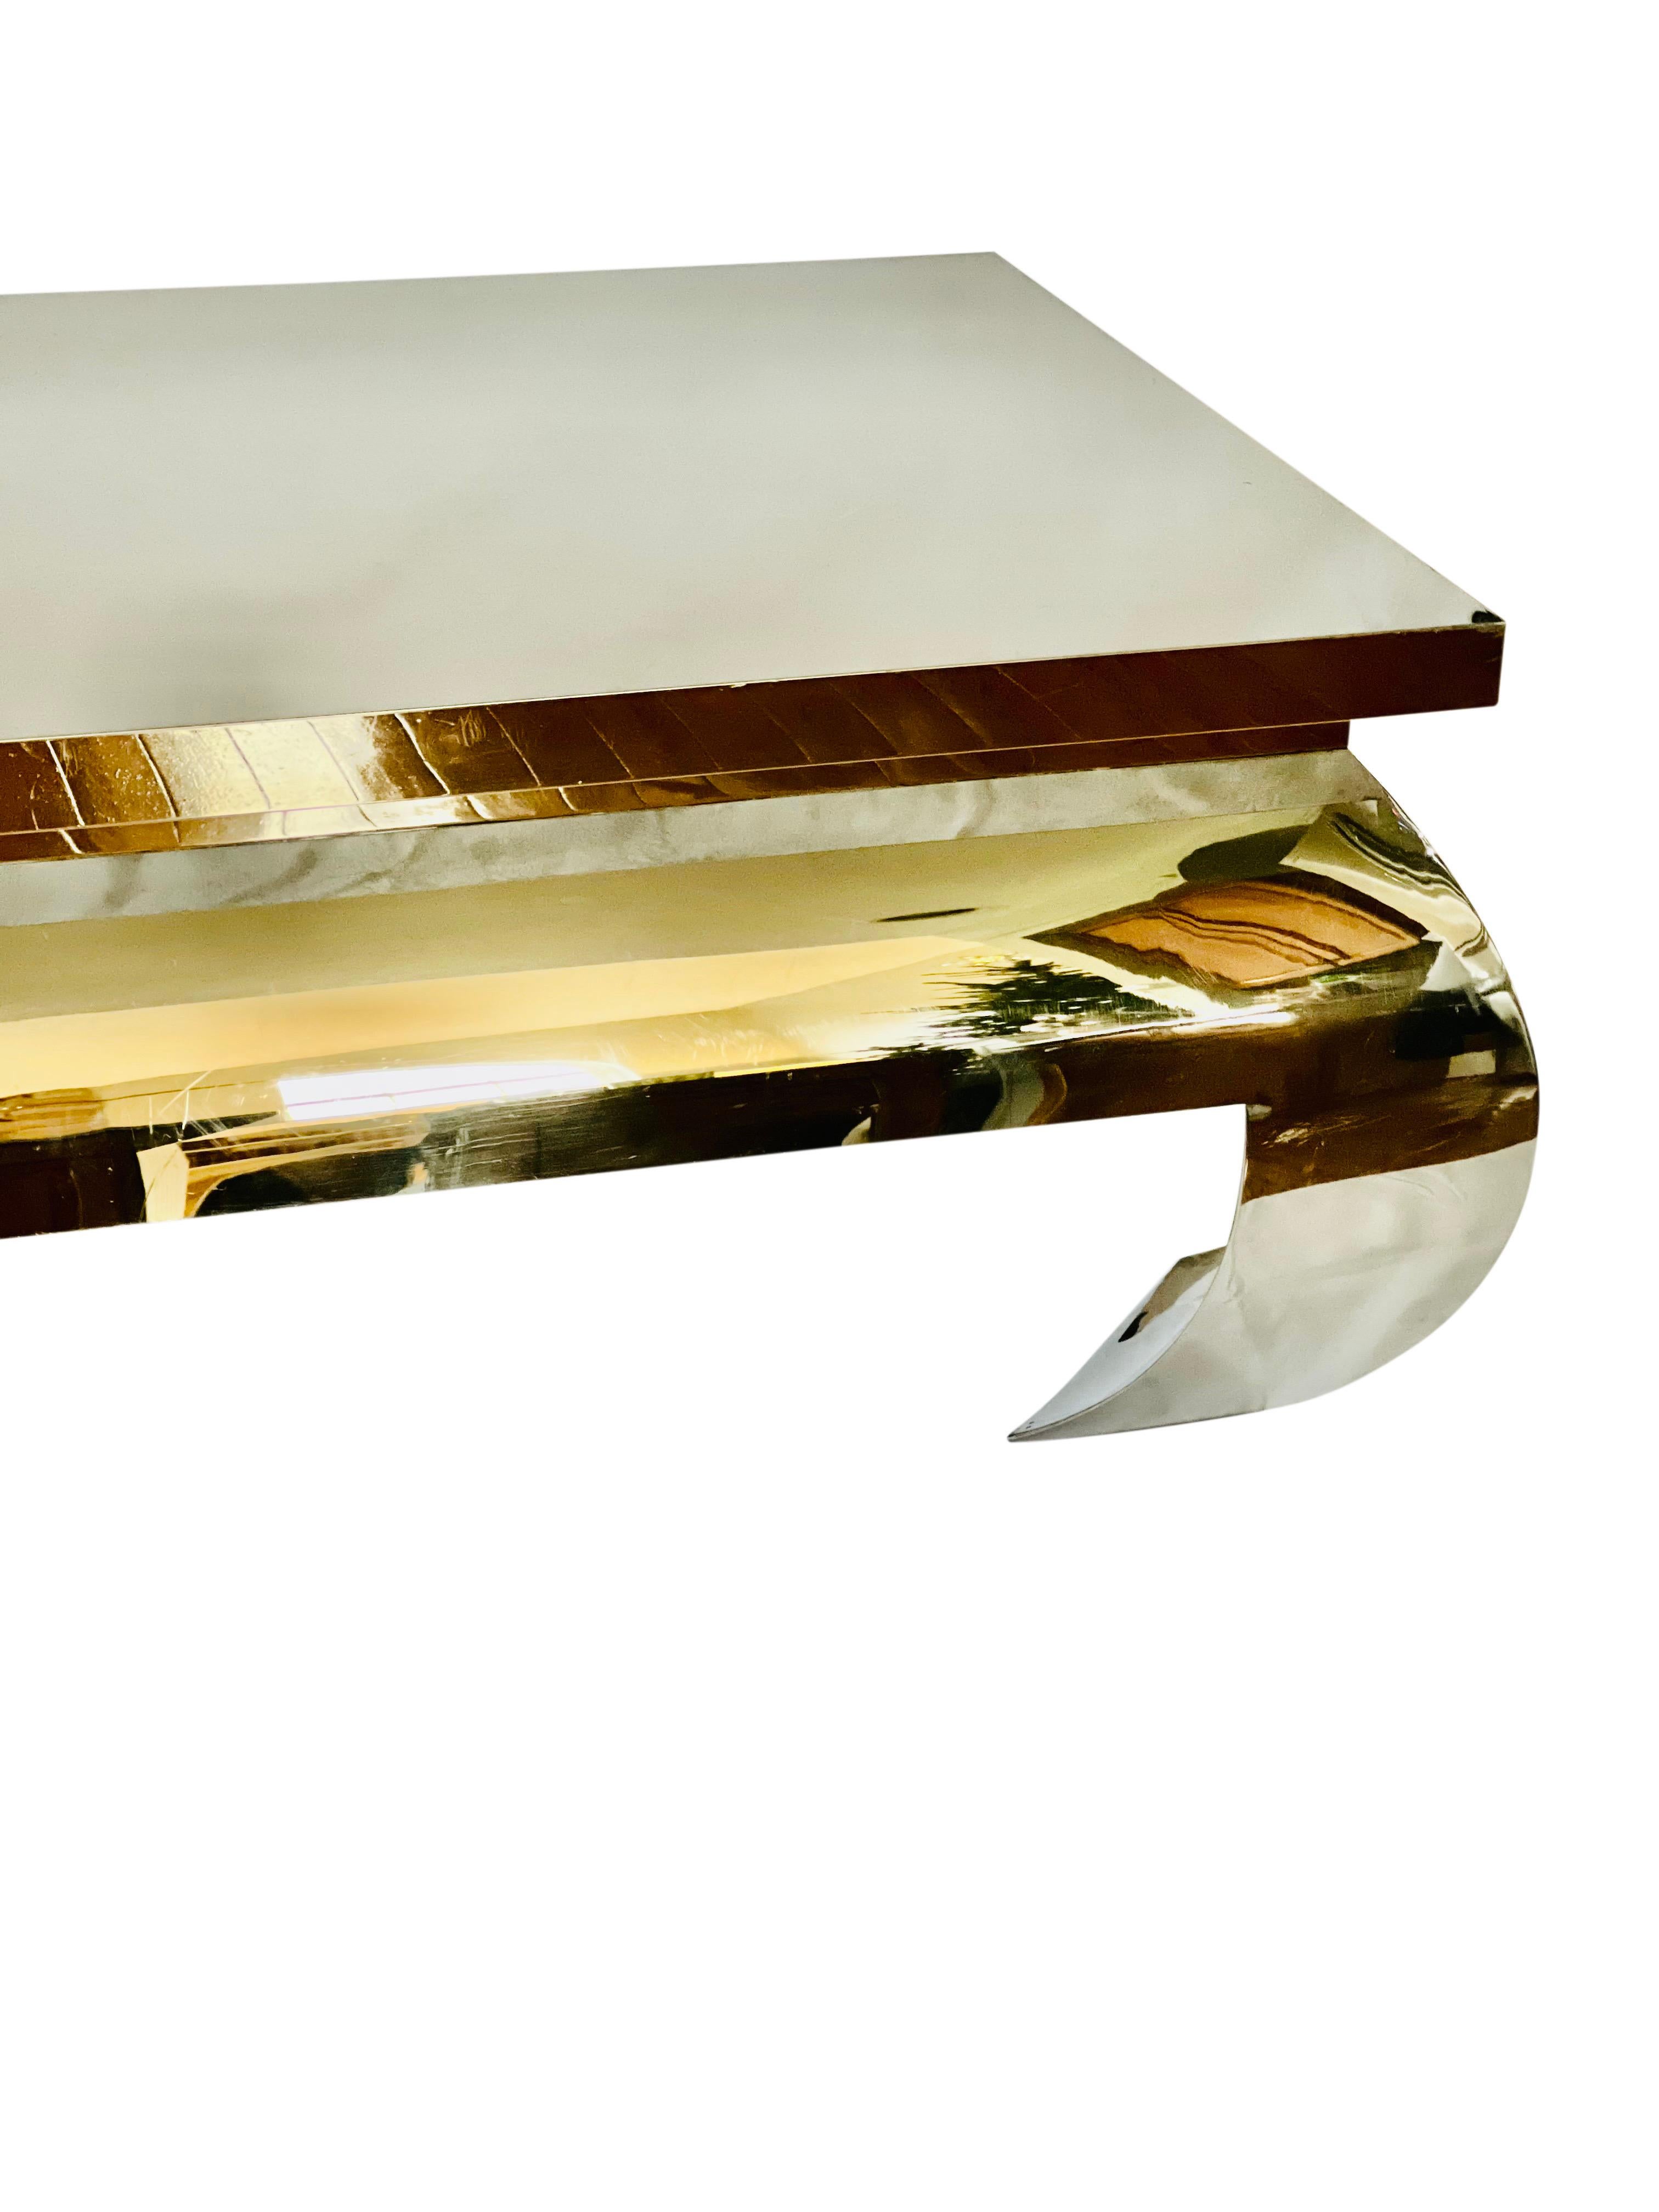 James Mont Polished Stainless Steel Coffee Table 1